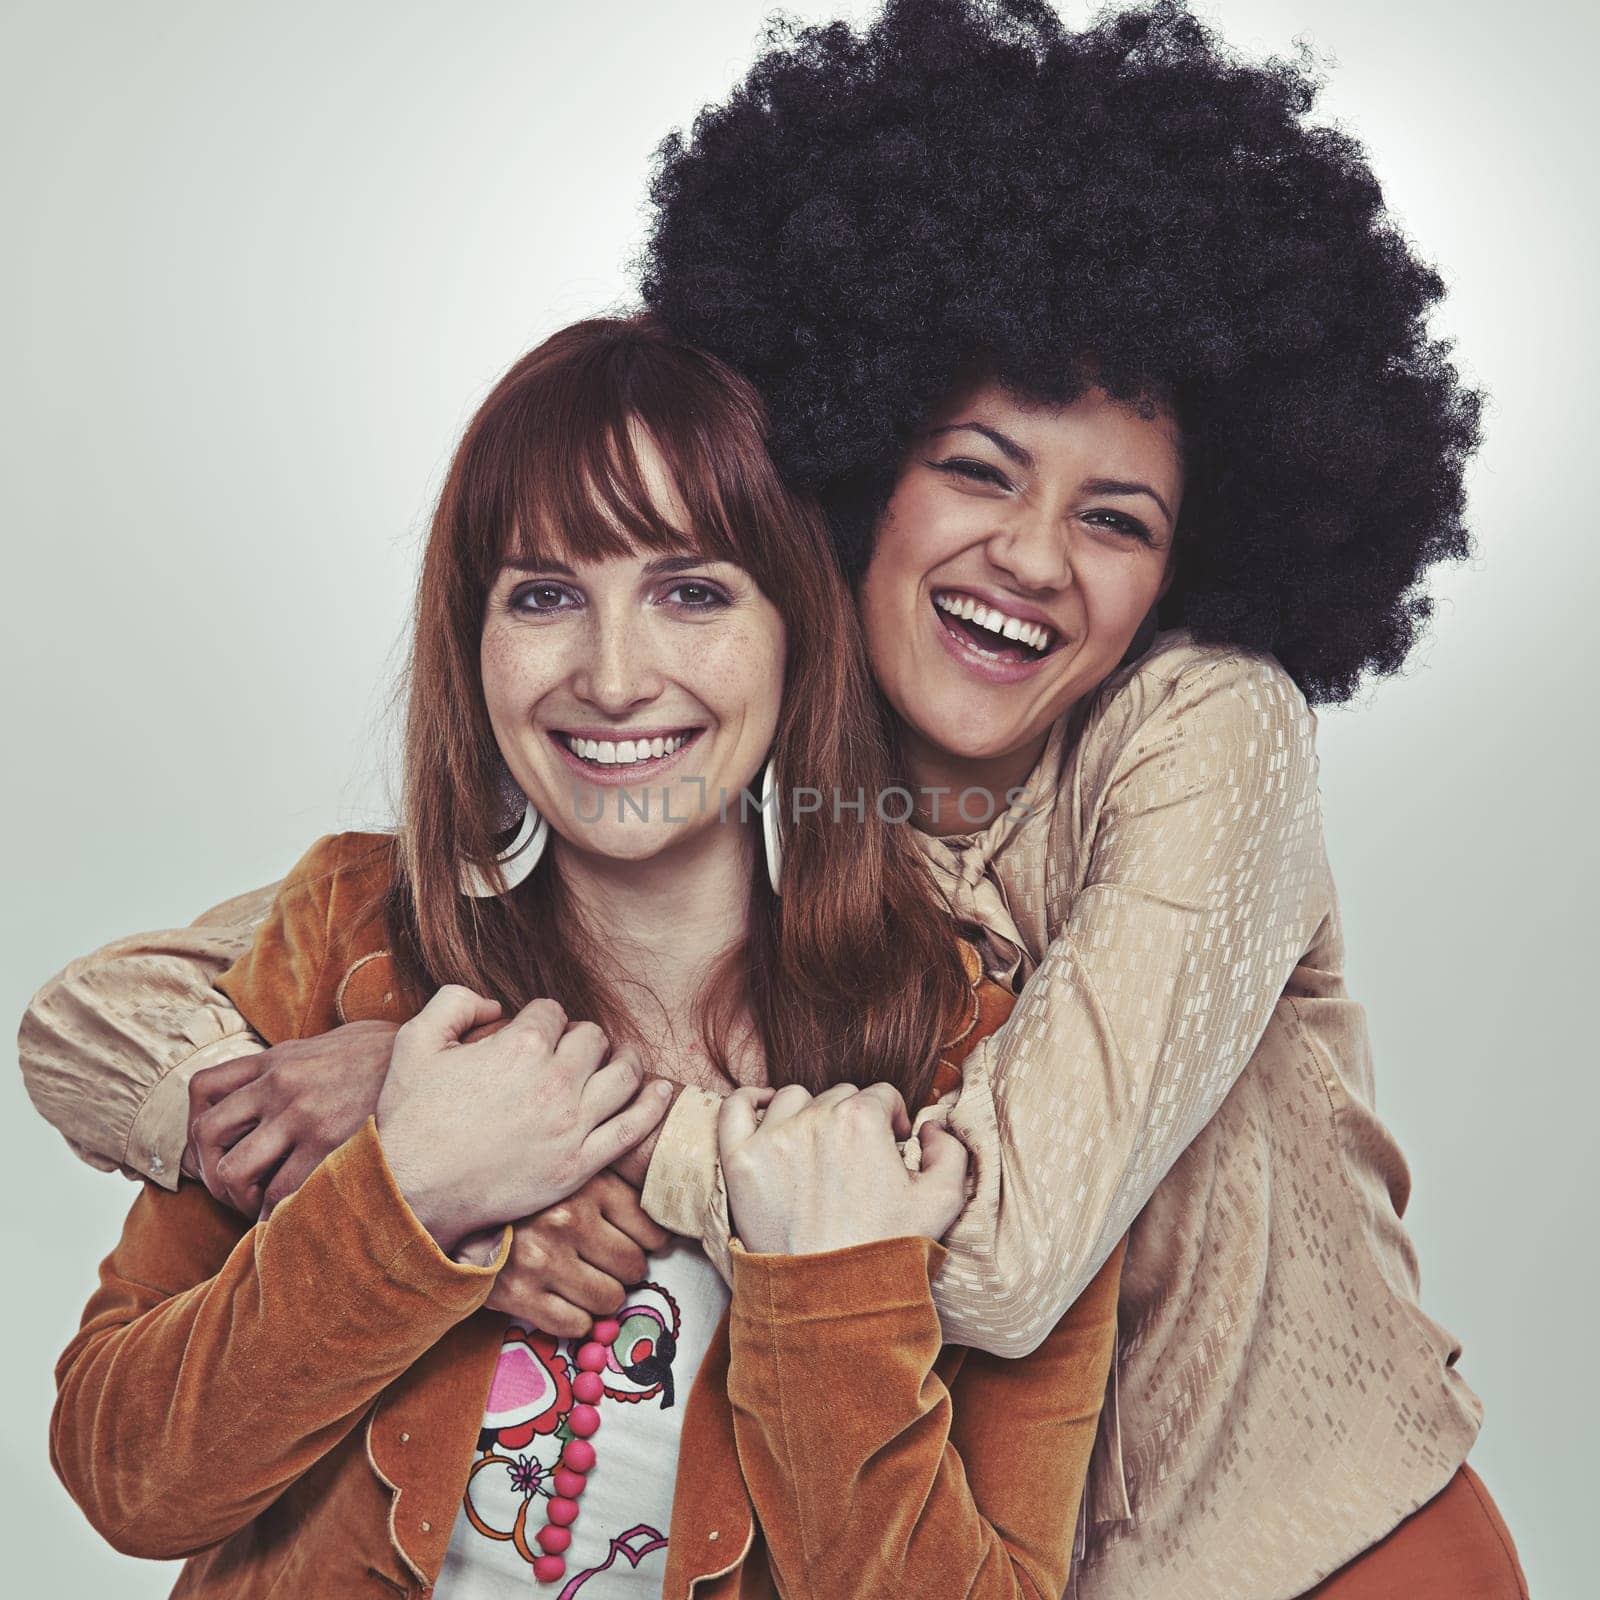 Vintage, portrait and friends with retro style, smile and laugh with hug in studio with grey background. Girls, happiness and unique with fashion in outfits, clothes and women with confidence.